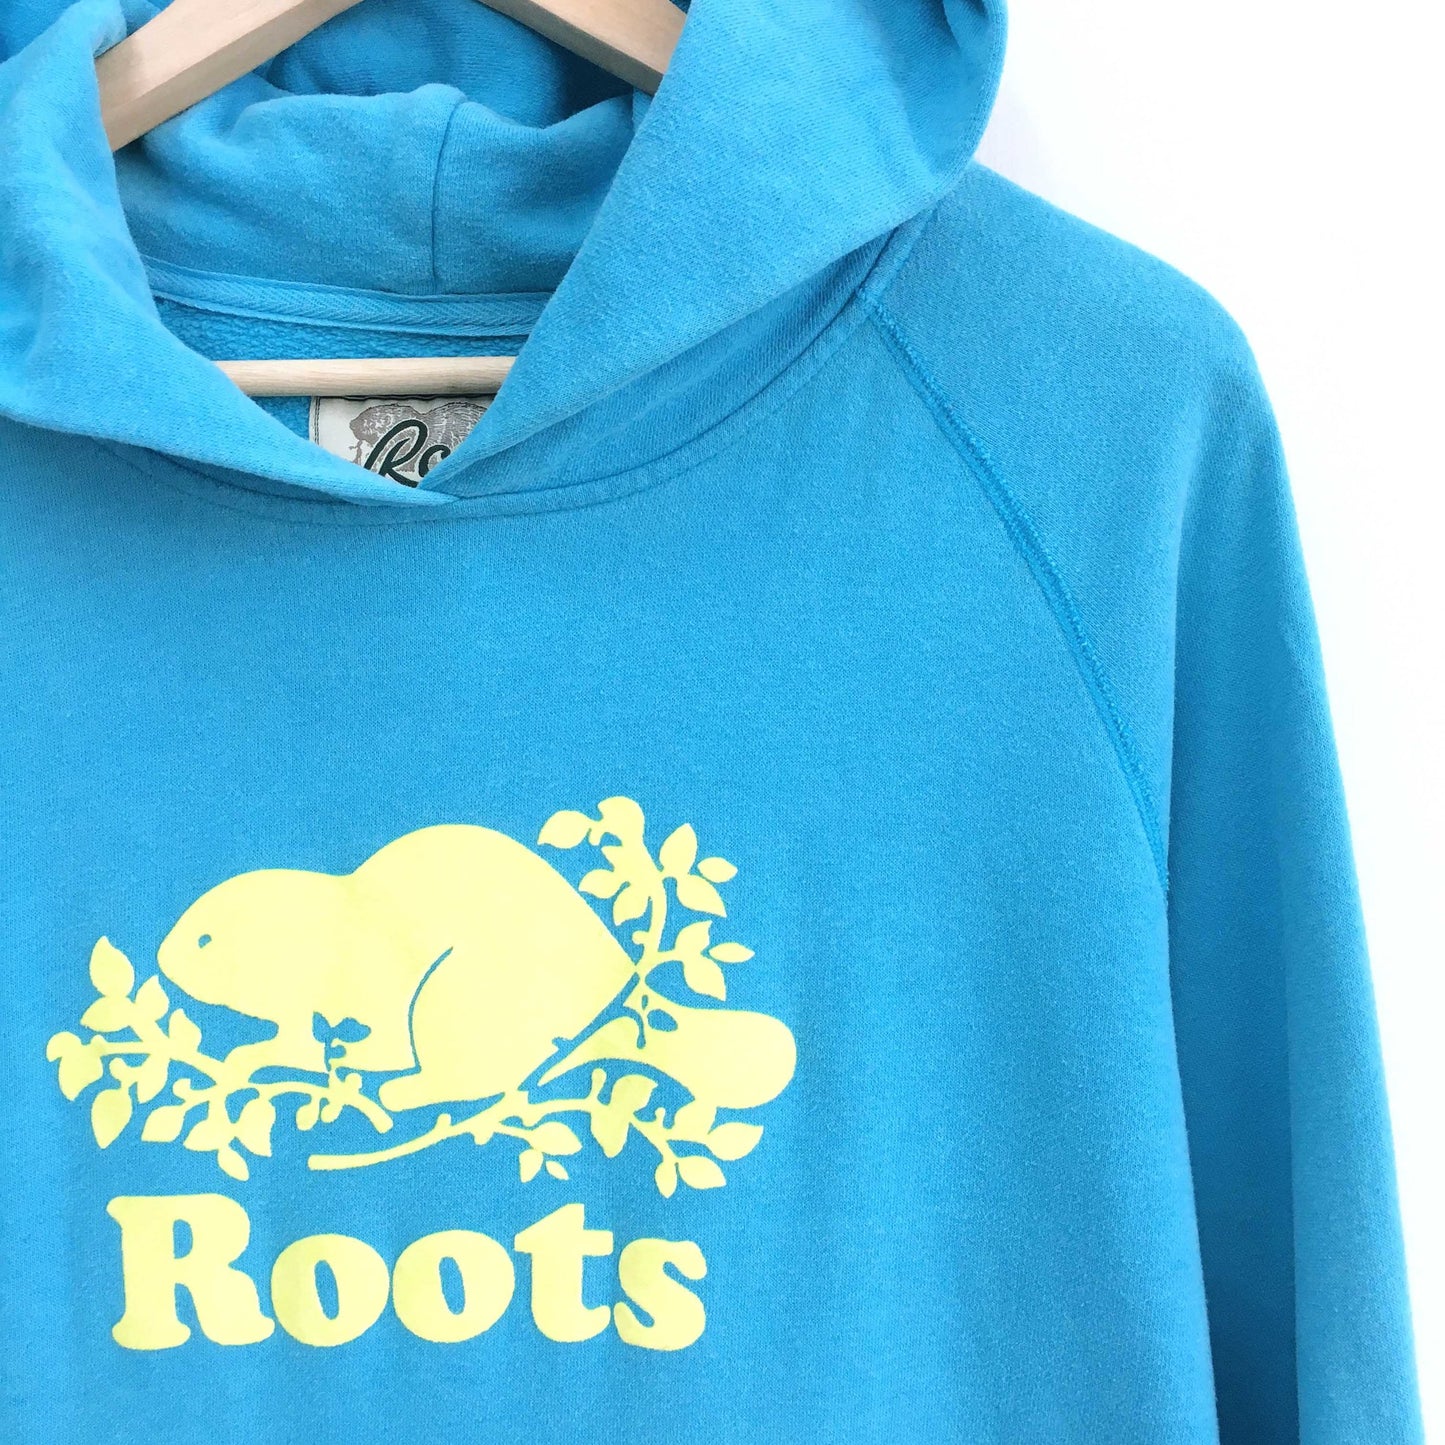 Roots Hoodie with felt logo - size Large